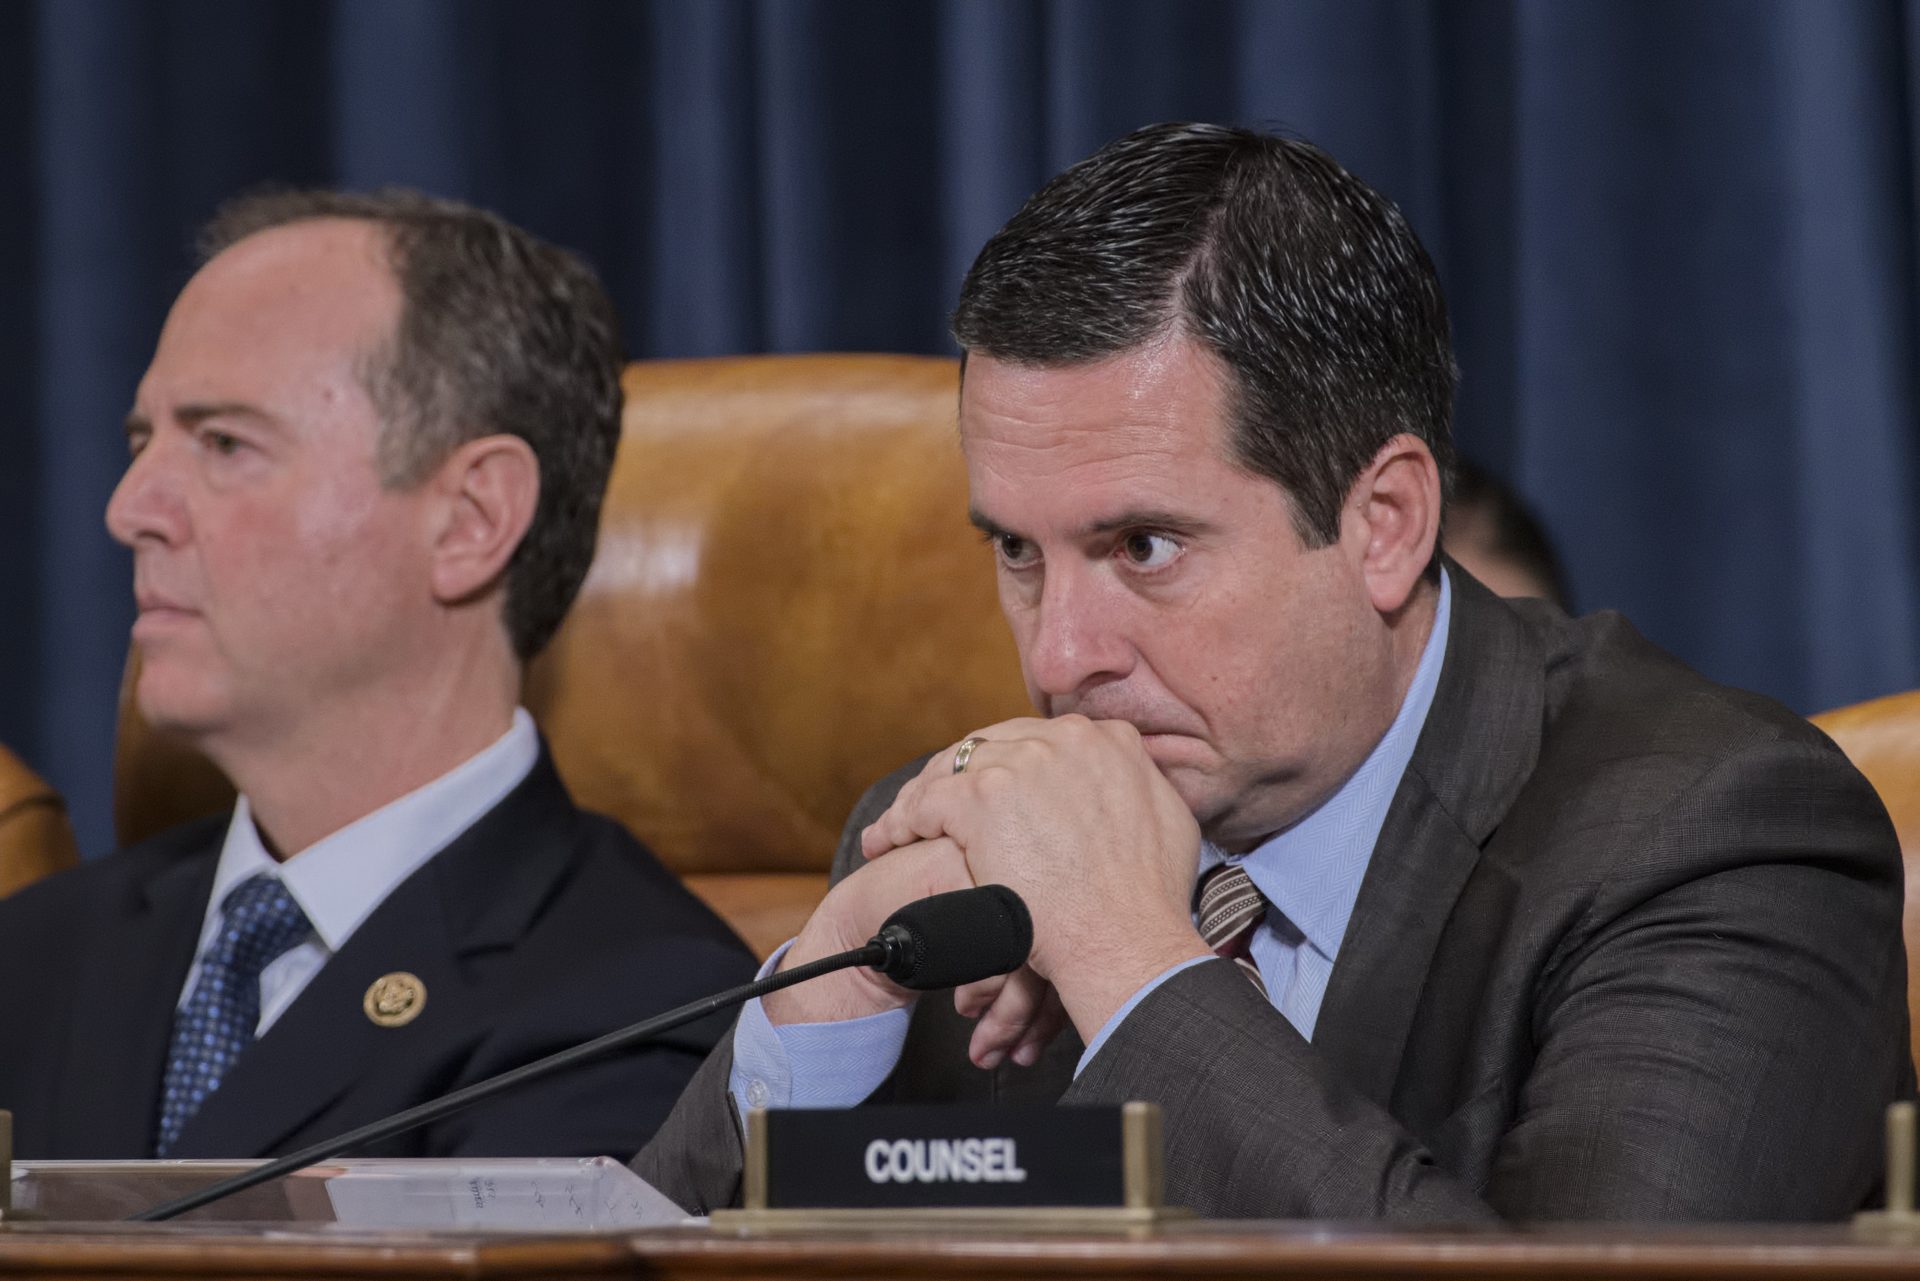 Rep. Devin Nunes, R-Calif, the ranking member of the House Intelligence Committee, joined at left by Chairman Adam Schiff, D-Calif., pauses at the conclusion of questioning of witnesses Jennifer Williams, an aide to Vice President Mike Pence, and National Security Council aide Lt. Col. Alexander Vindman, on Capitol Hill in Washington, Tuesday, Nov. 19, 2019, during a public impeachment hearing of President Donald Trump's efforts to tie U.S. aid for Ukraine to investigations of his political opponents.